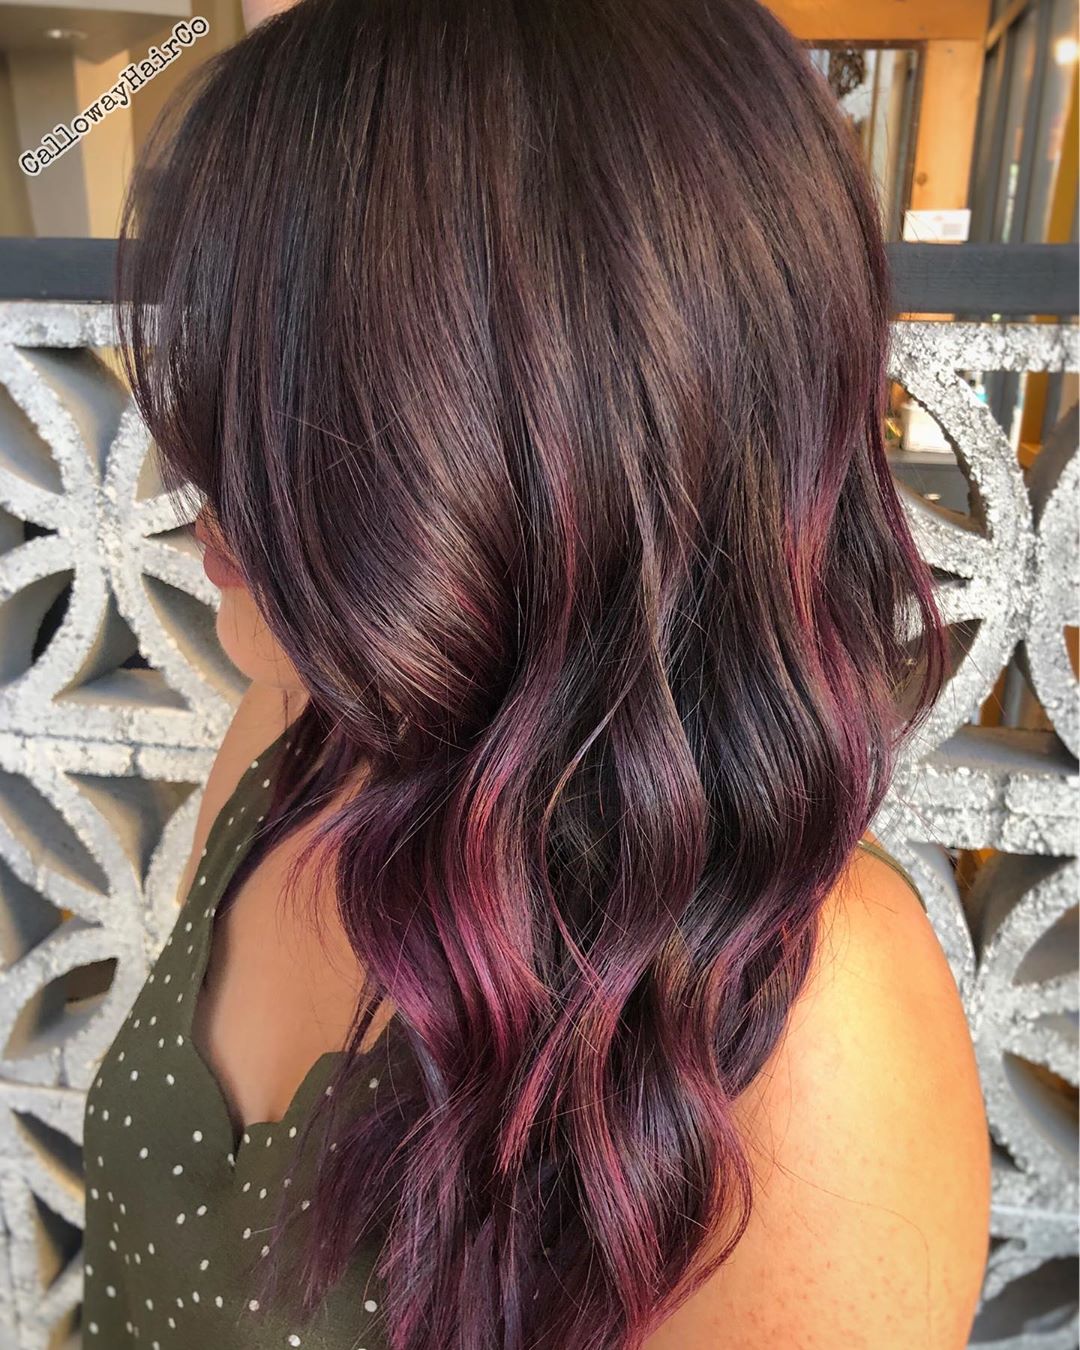 Burgundy Hair Color: 42 Shades And Styles To Try In 2023 | Hair.com By  L'Oréal